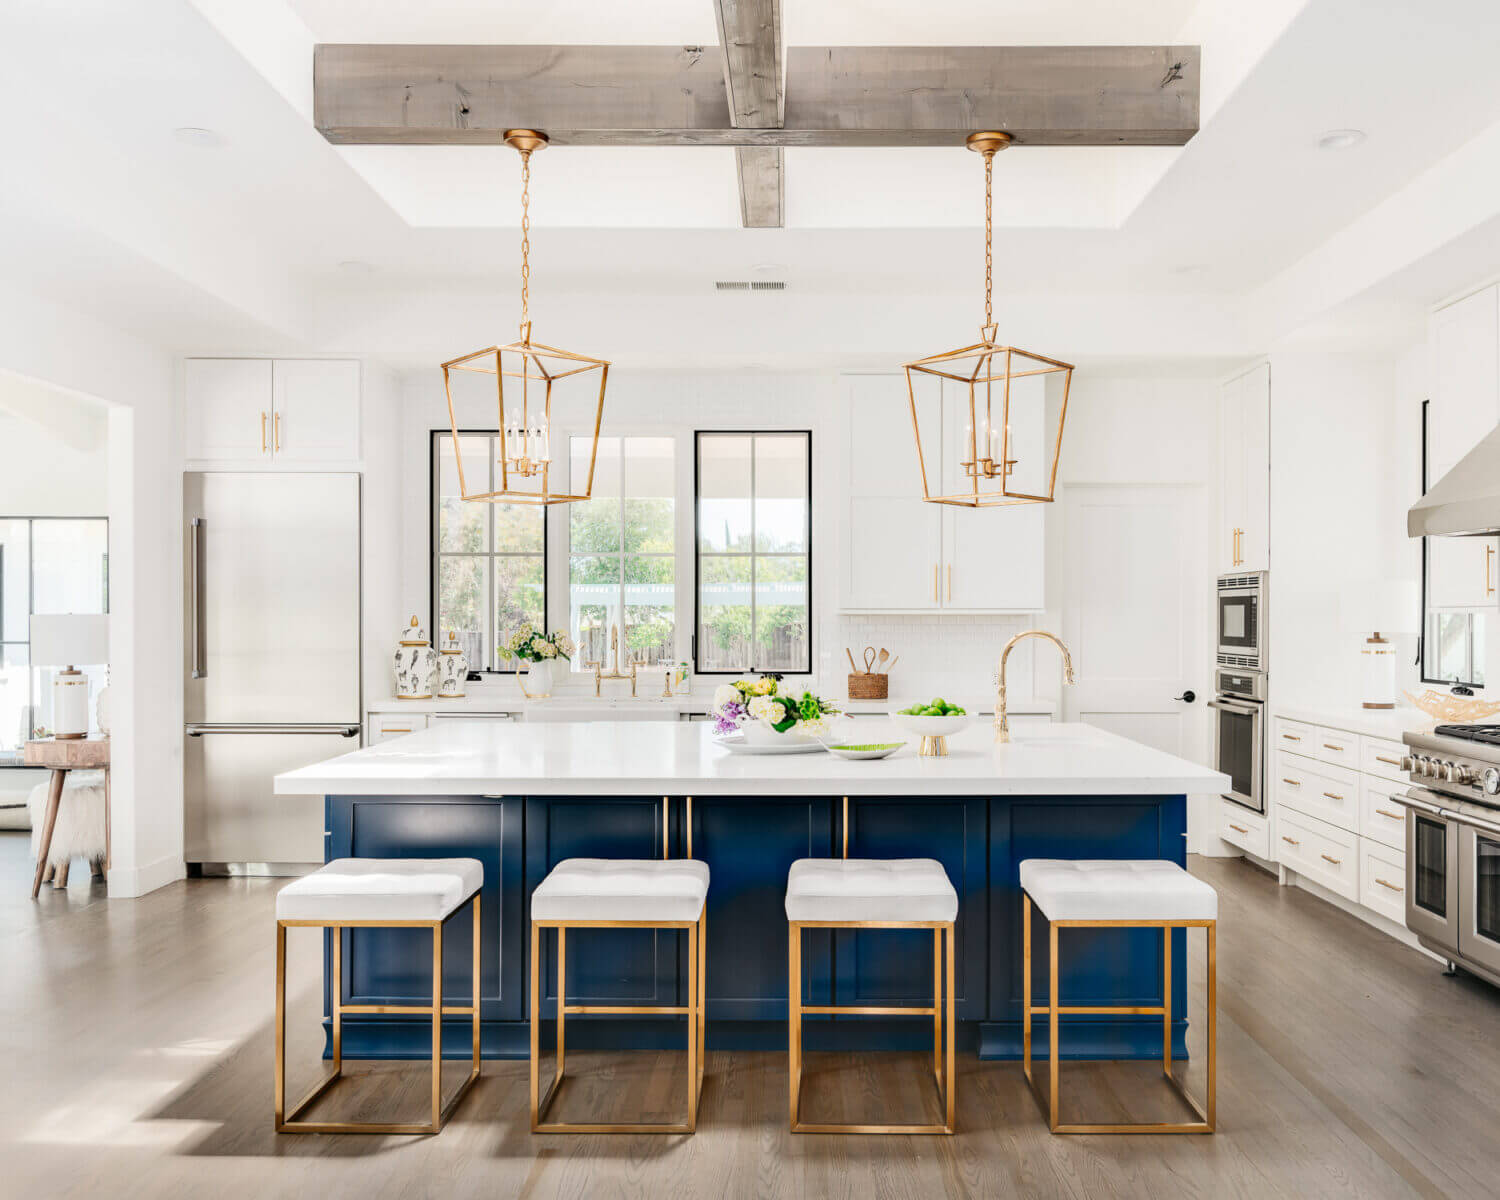 GOLD, White, and Blue American Kitchen - Dura Supreme Cabinetry